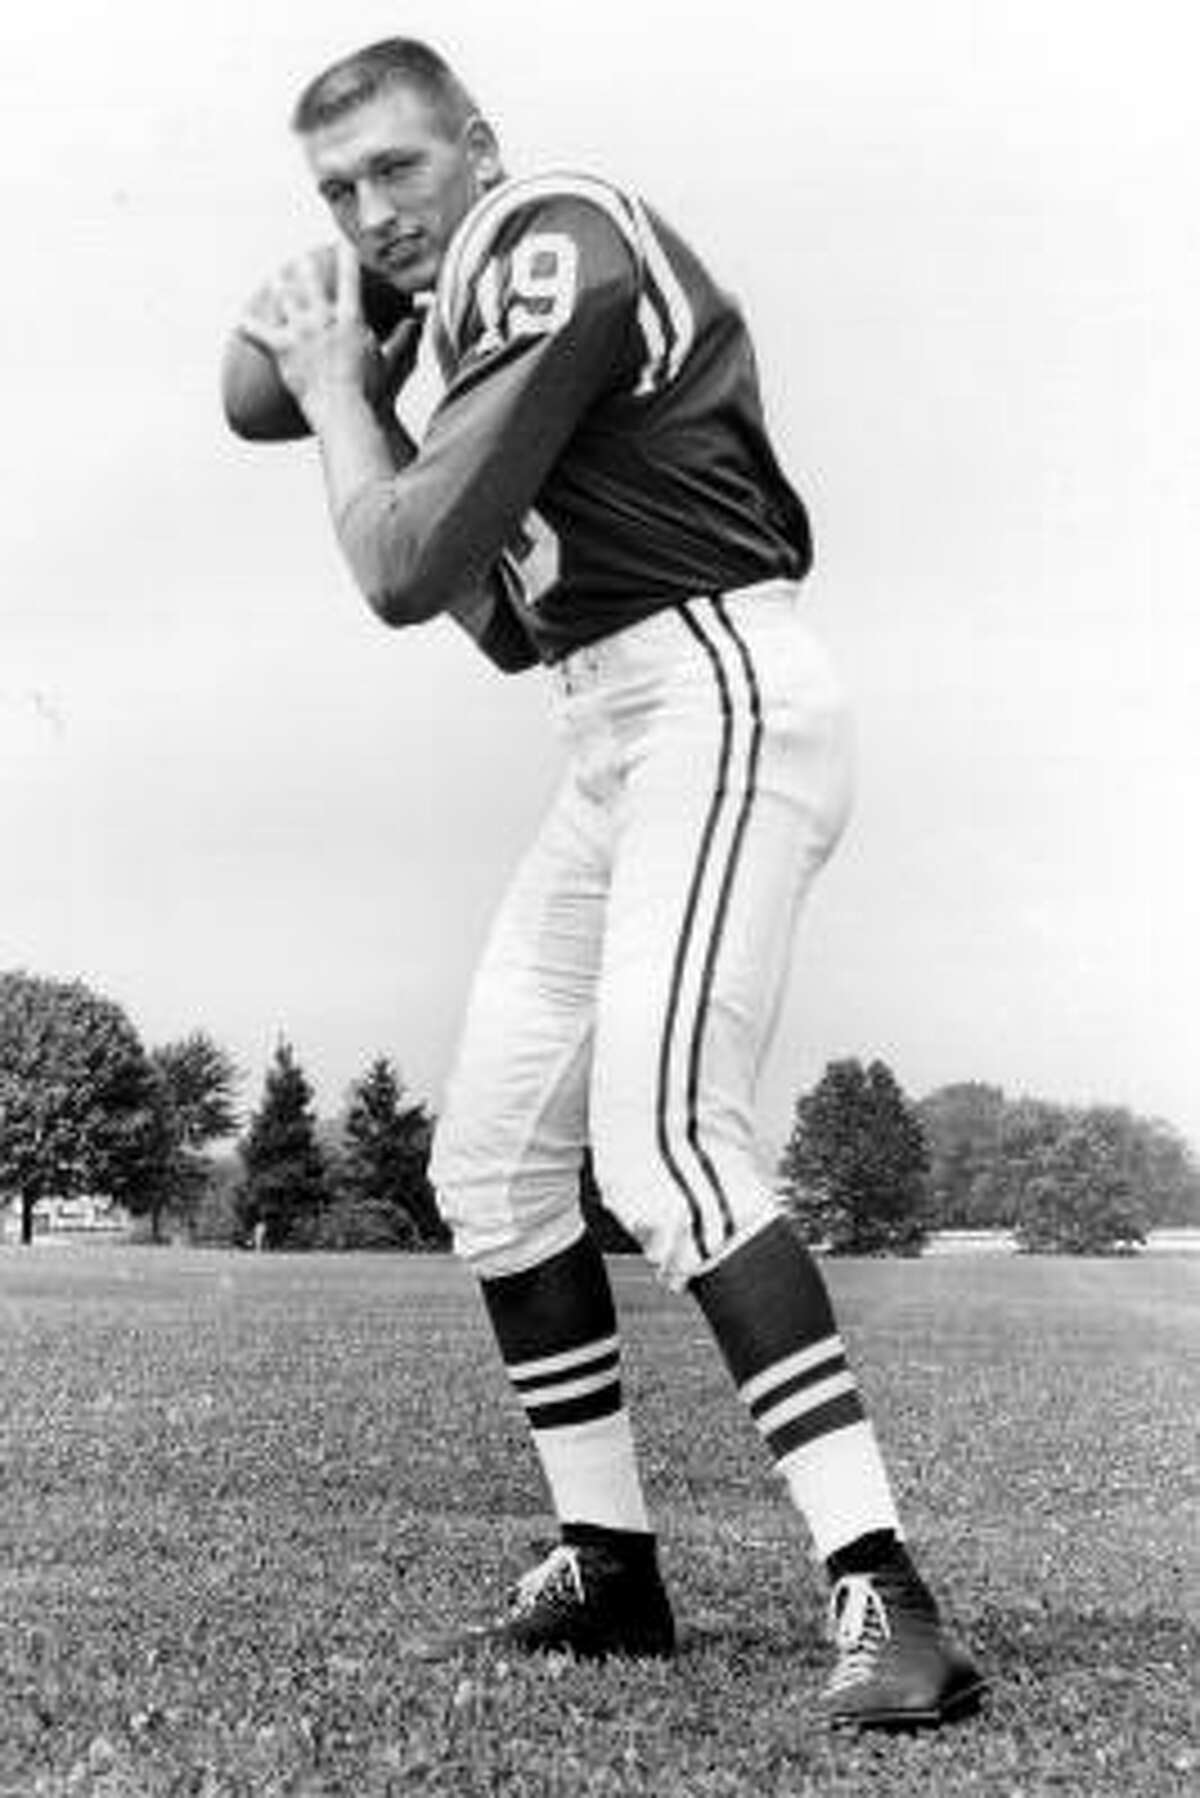 Johnny Unitas (Colts, Chargers) Unitas played until he was 40, but started more than five games in a season only once in his last four year years. When he was 37 he passed for 2,213 yards – the 12th highest total of his career. He did go 10-2-1 as a starter in the regular season and threw one touchdown pass in the Super Bowl to help the Colts beat the Cowboys by three points.